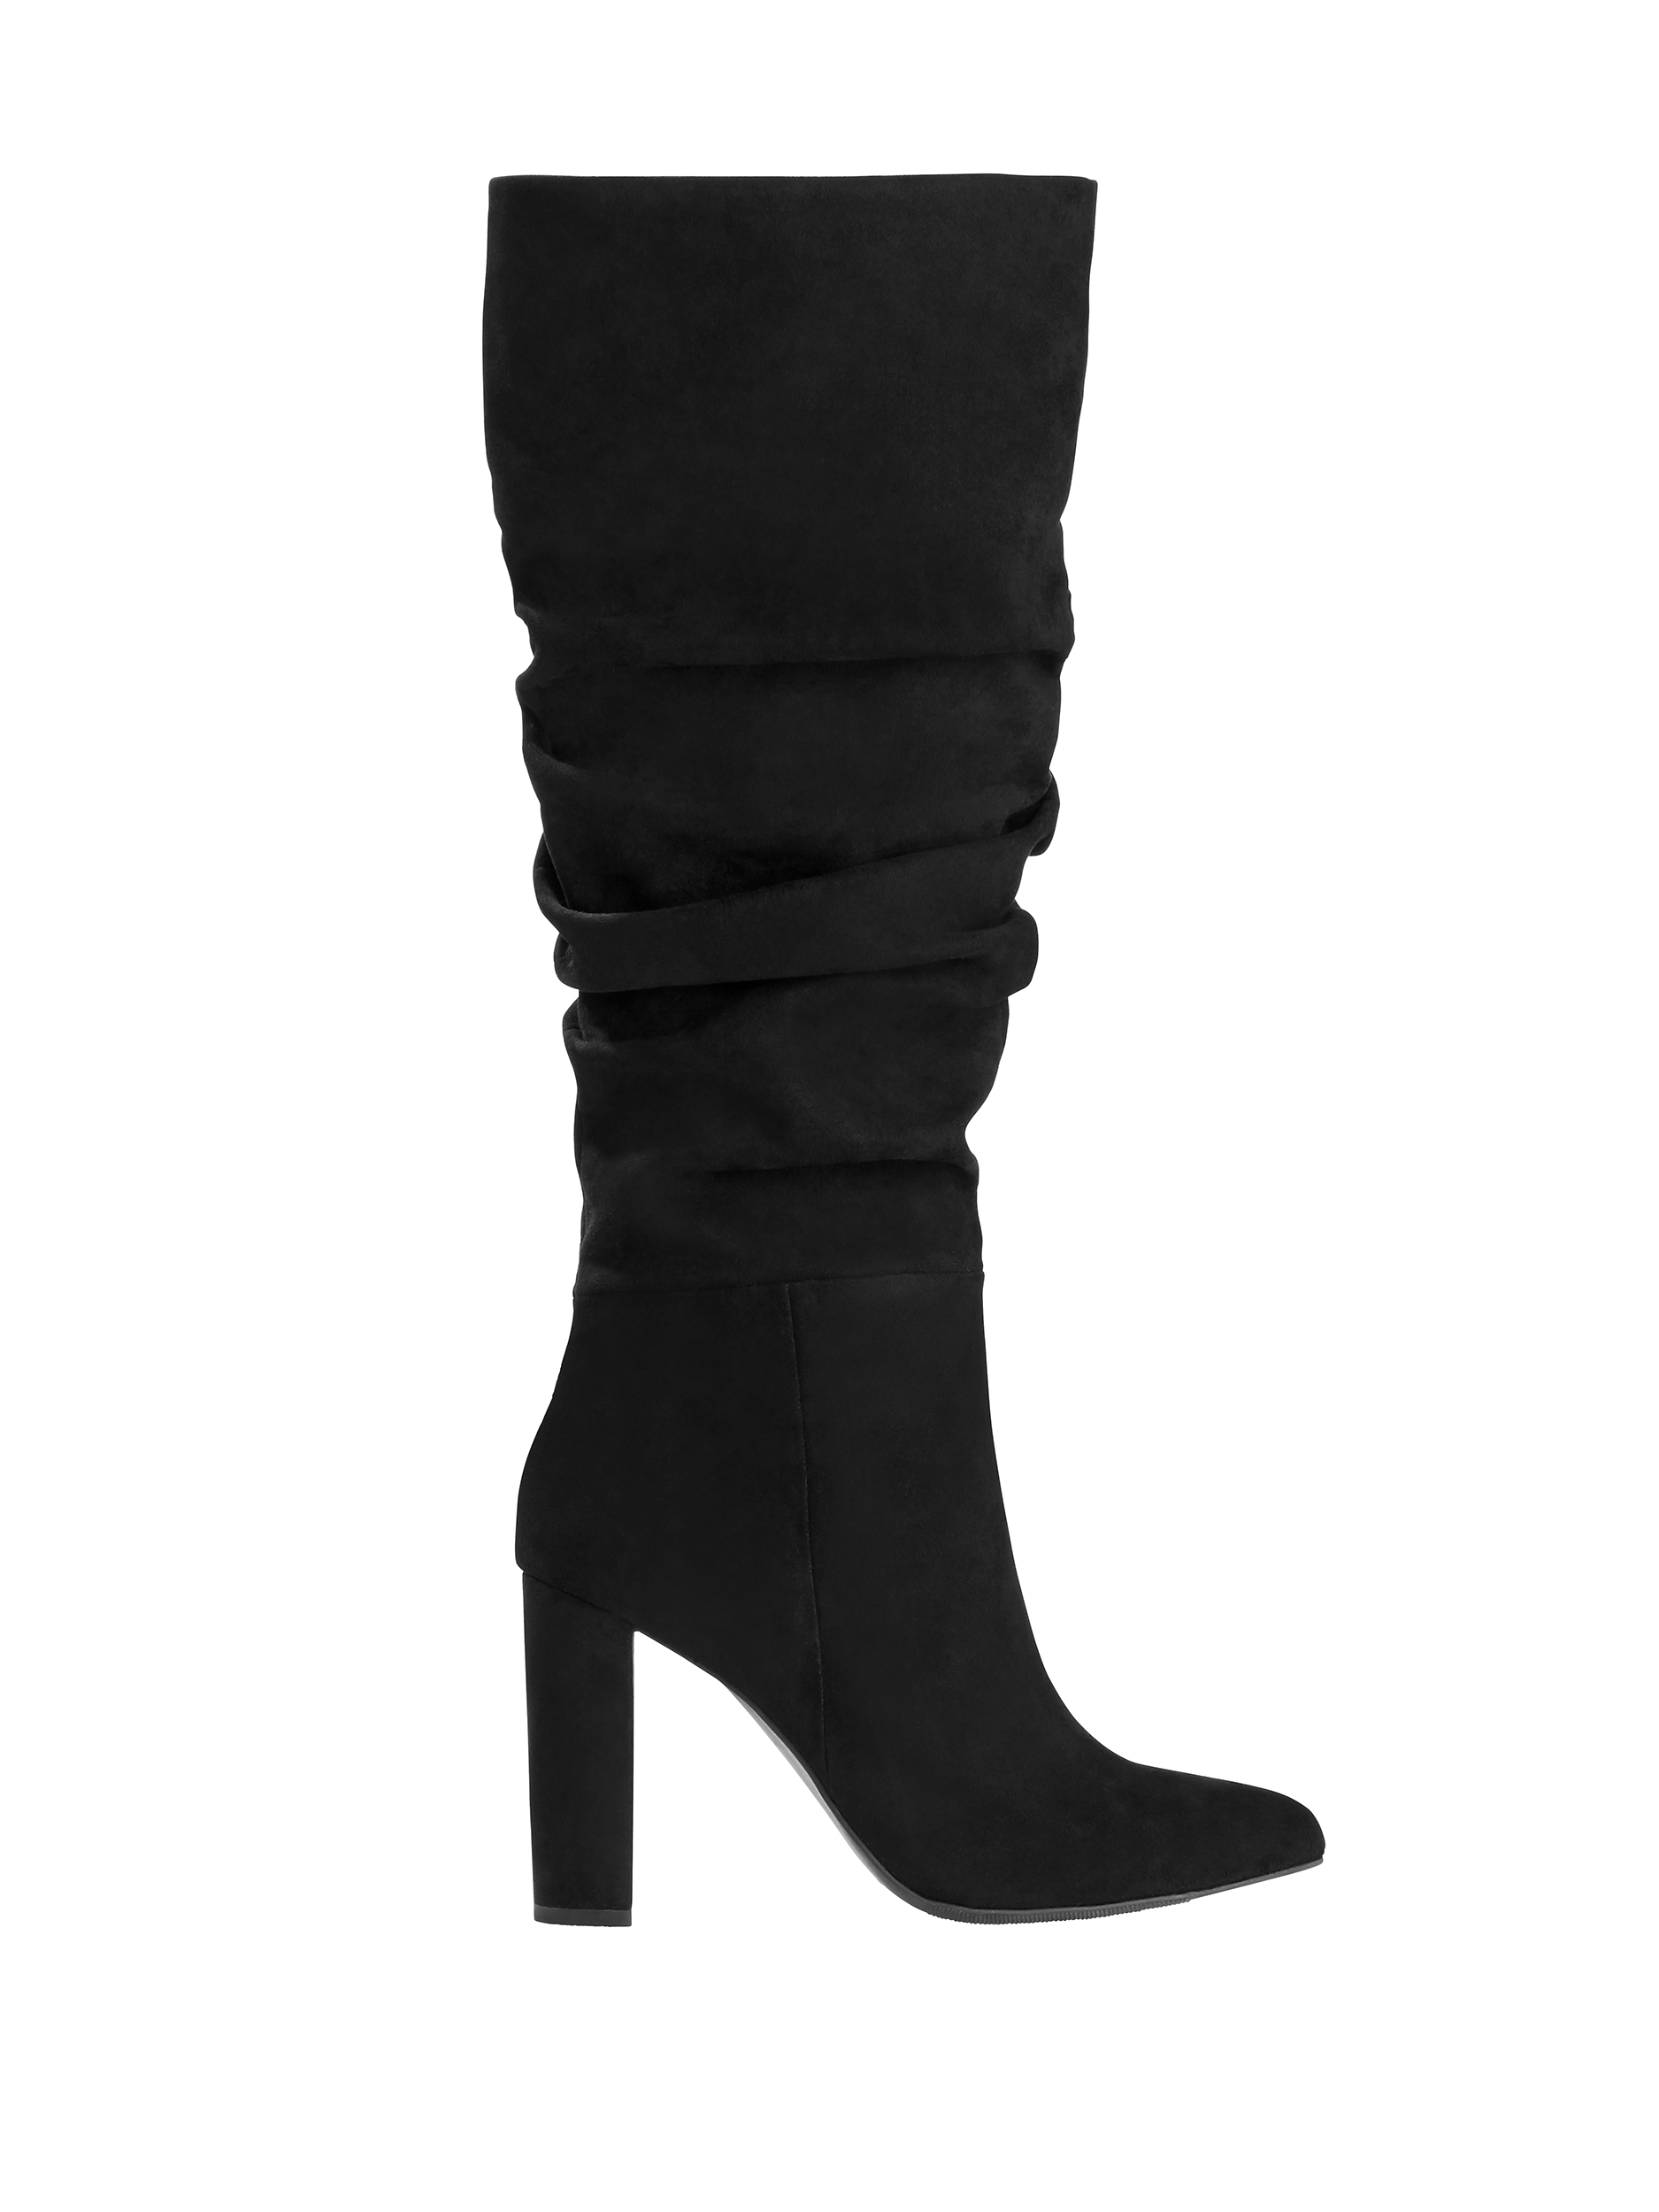 Scoop Women’s Penny Microsuede Slouch Boots - image 2 of 6